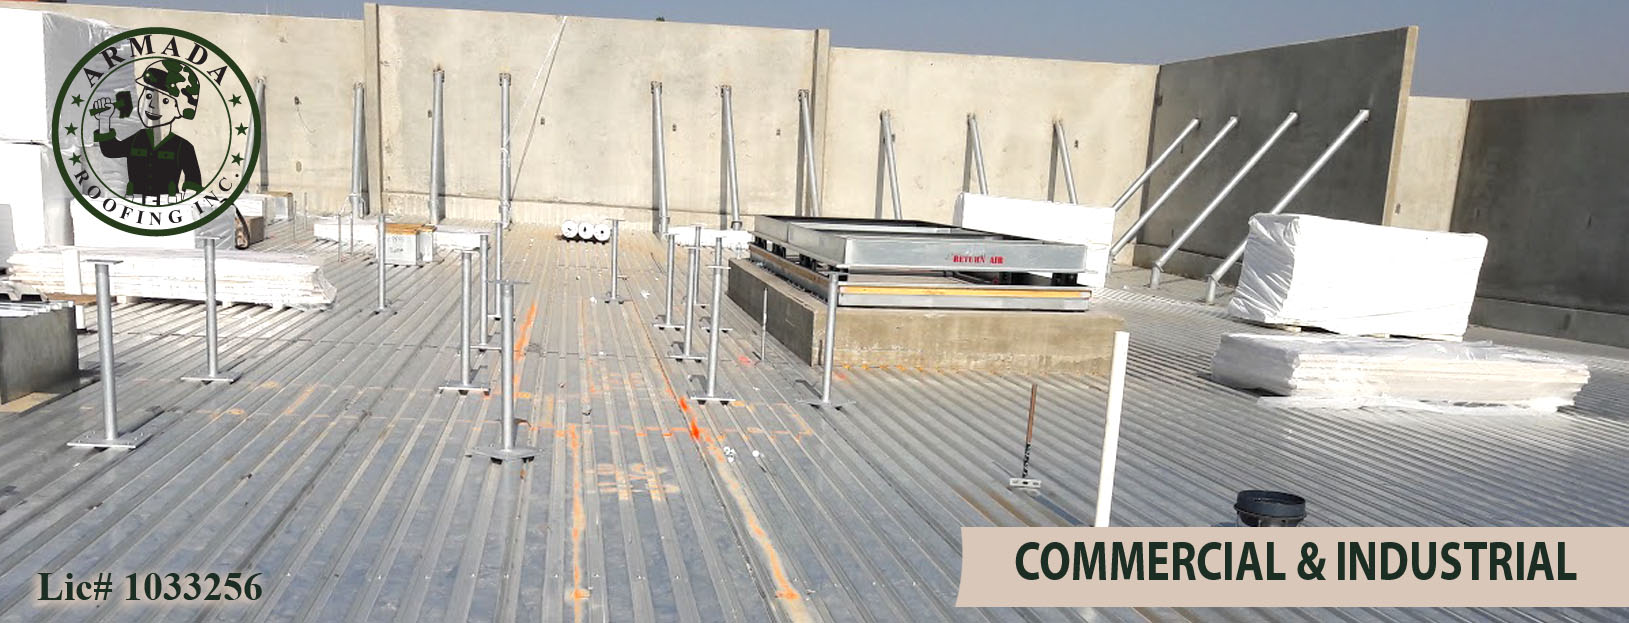 Single Ply Roofing for Flat Roofs in Riverside California commercial building and industrial